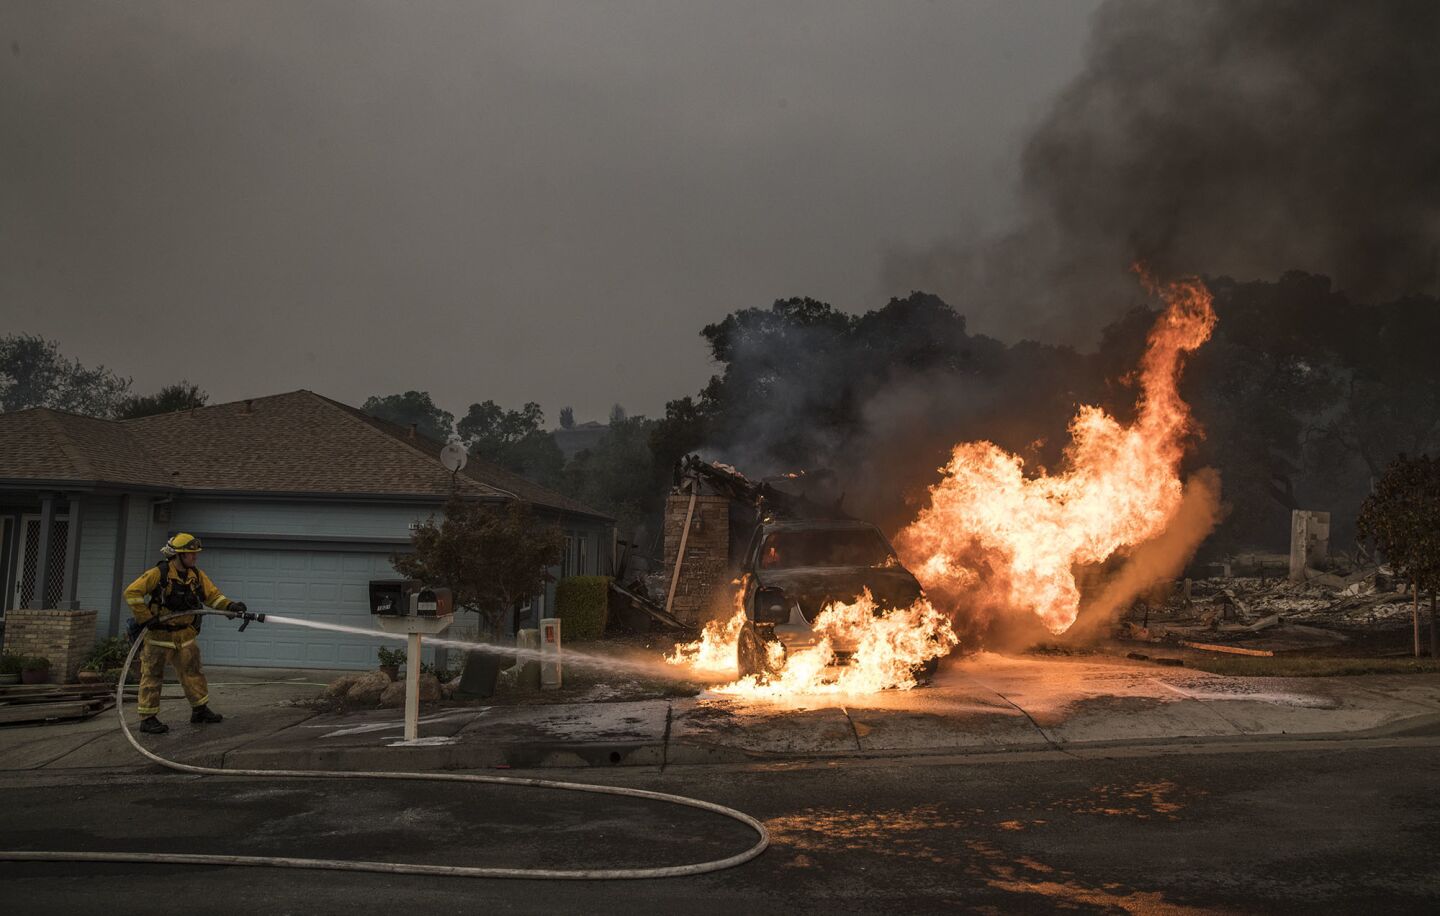 A fcar burns in the driveway of a destroyed home in Fountaingrove Village.